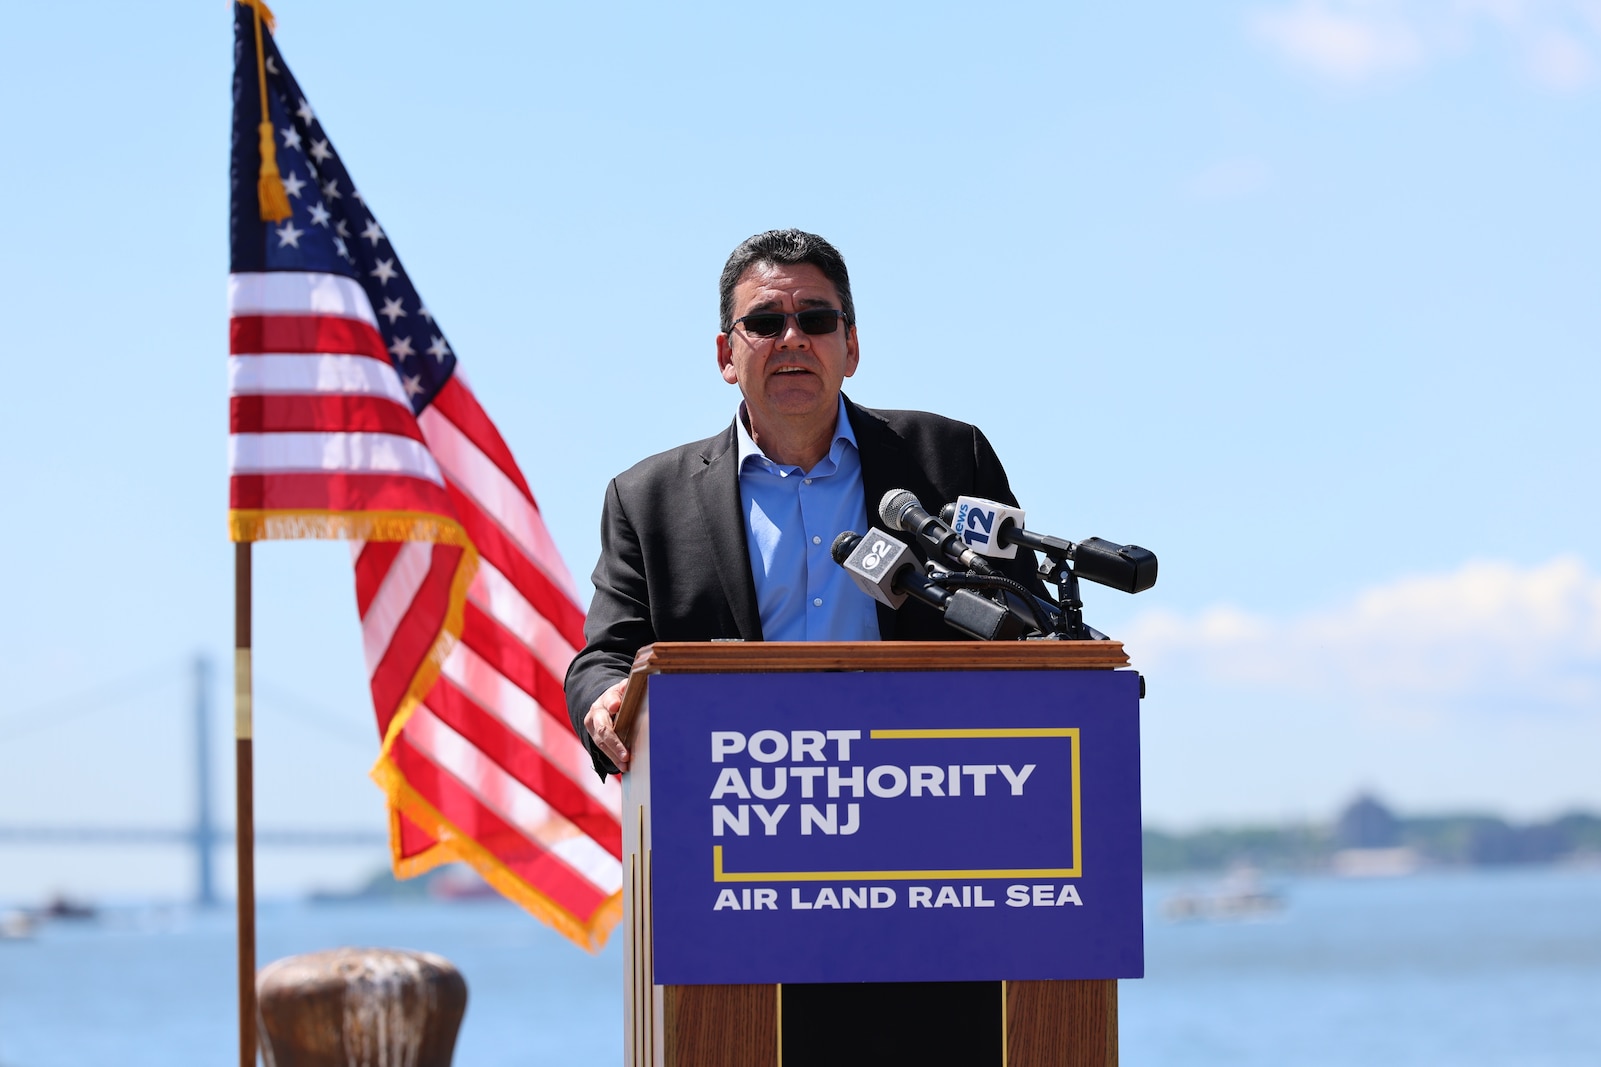 Michael Connor, Assistant Secretary of the Army for Civil Works speaks at a press event for port improvements.